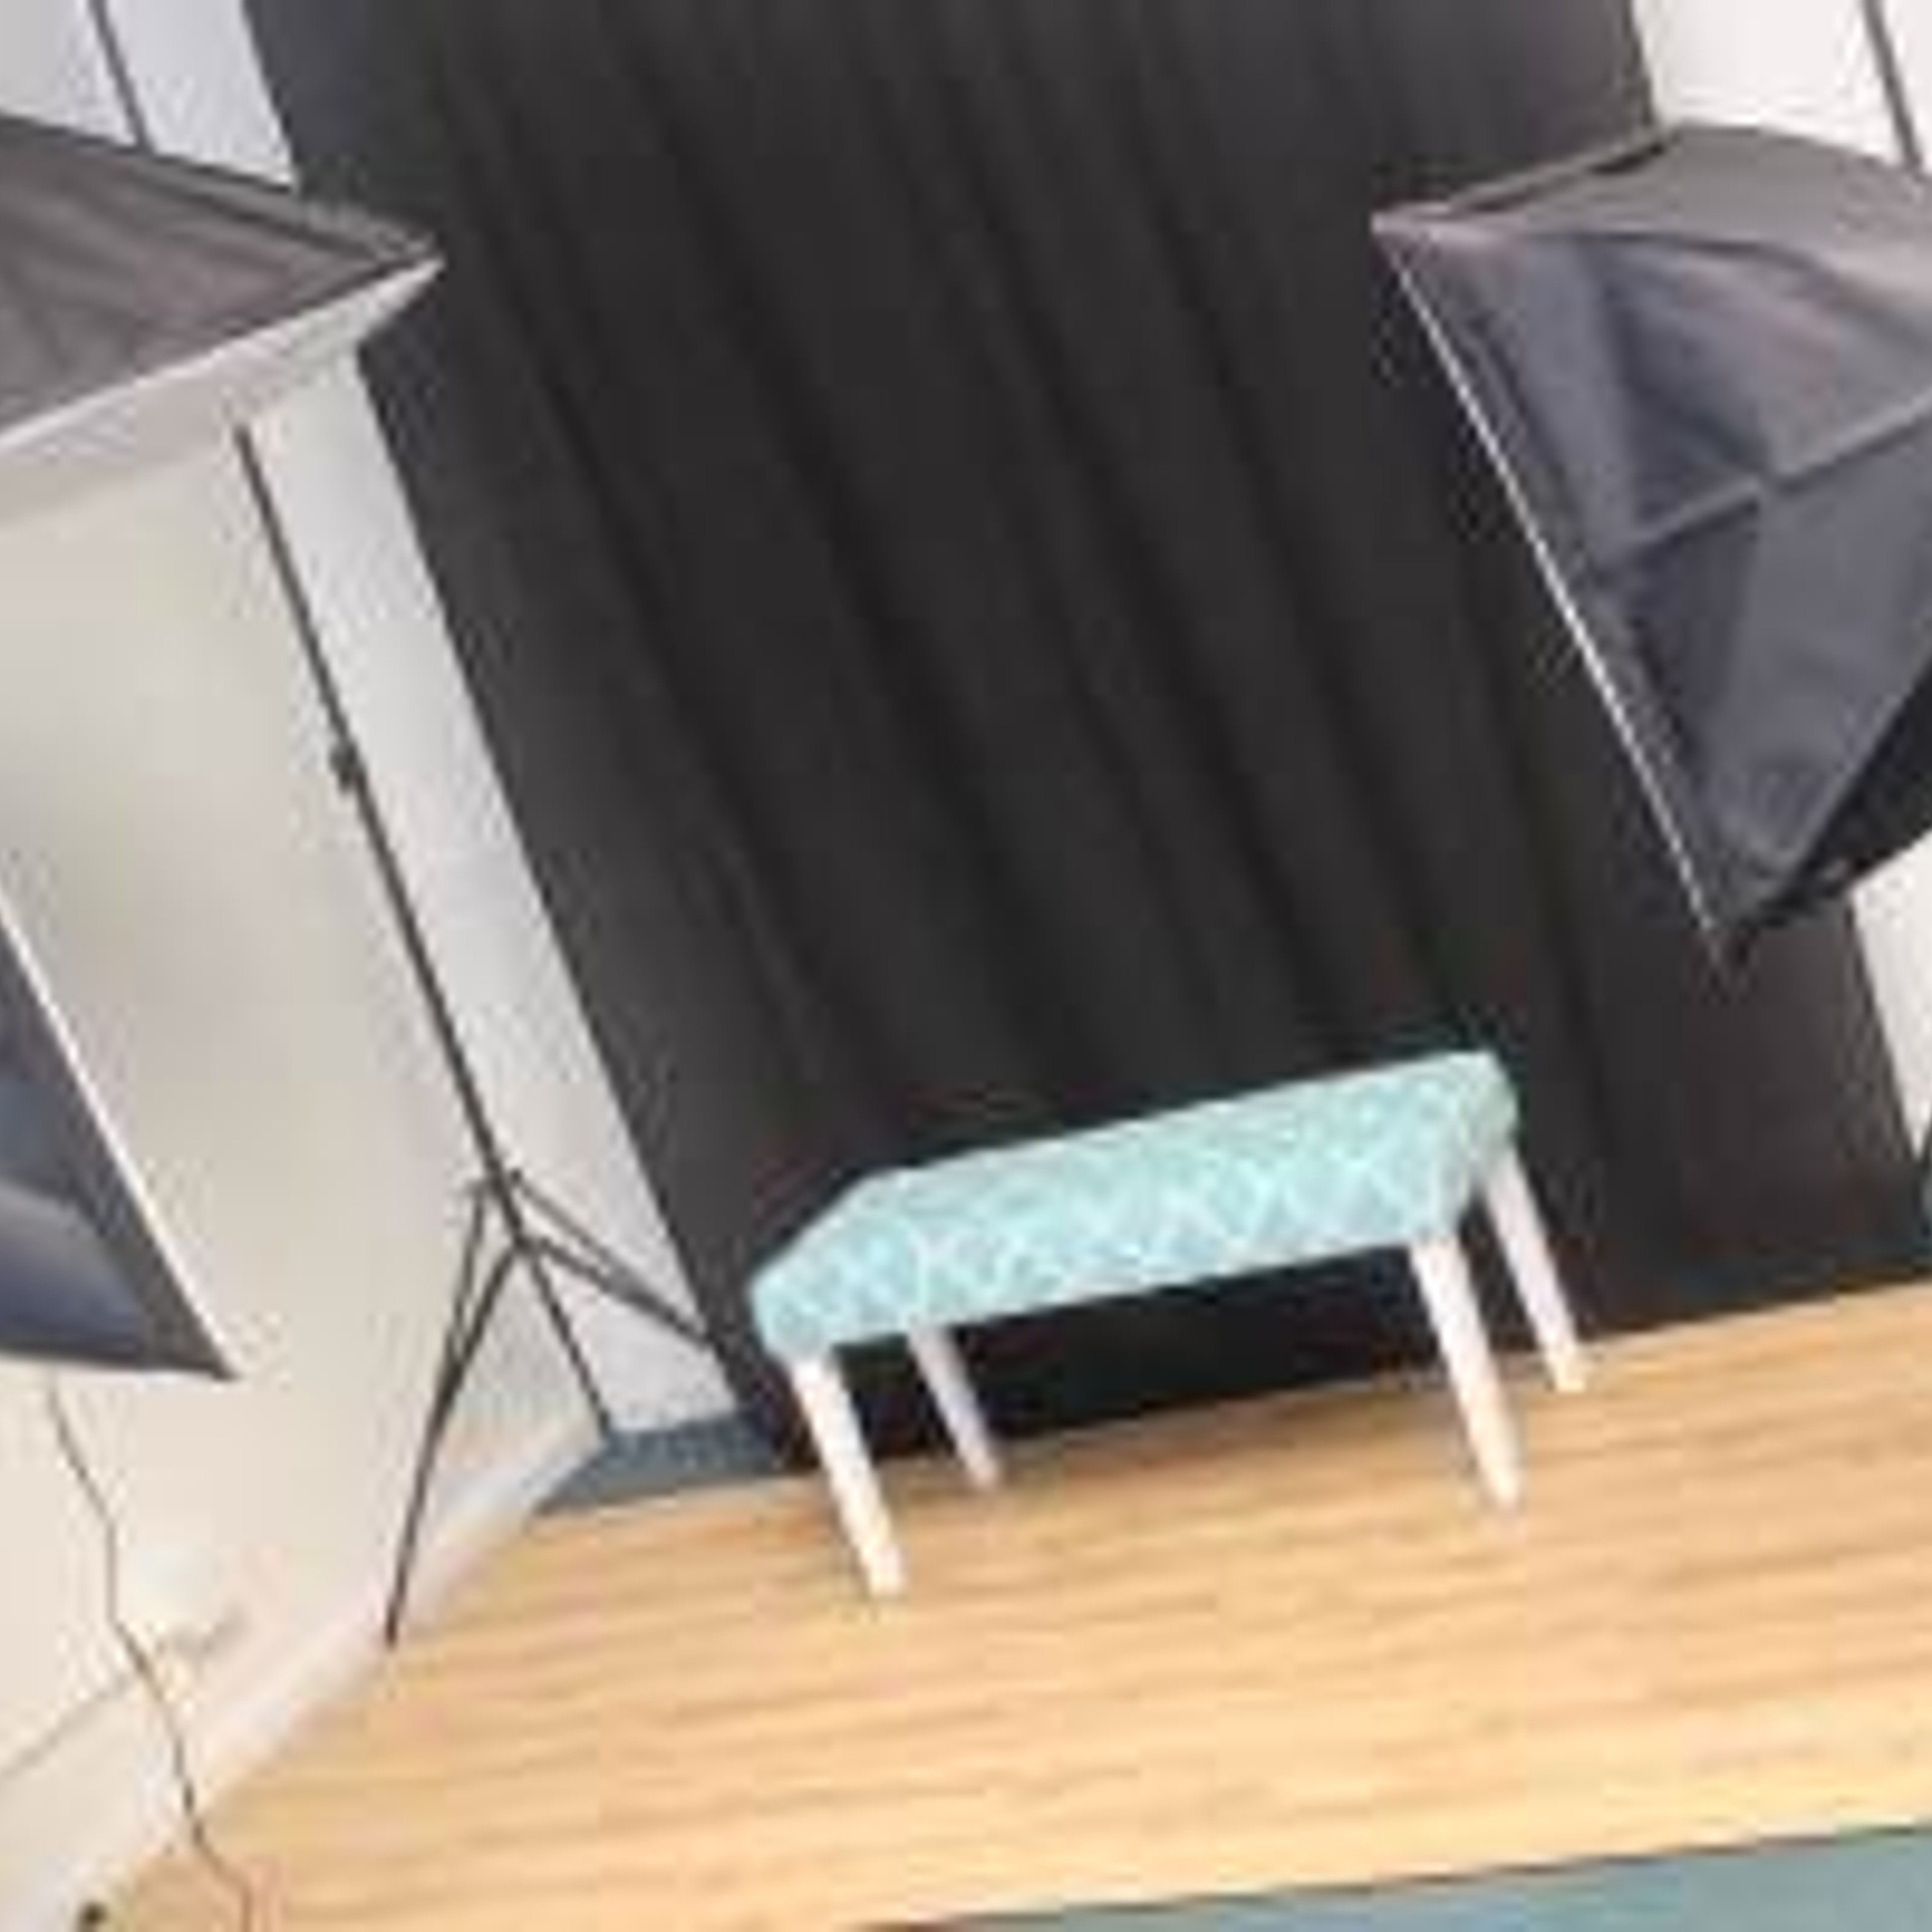 Photographer Office/ Studio Space for Rent- Perfect Space to meet Clients